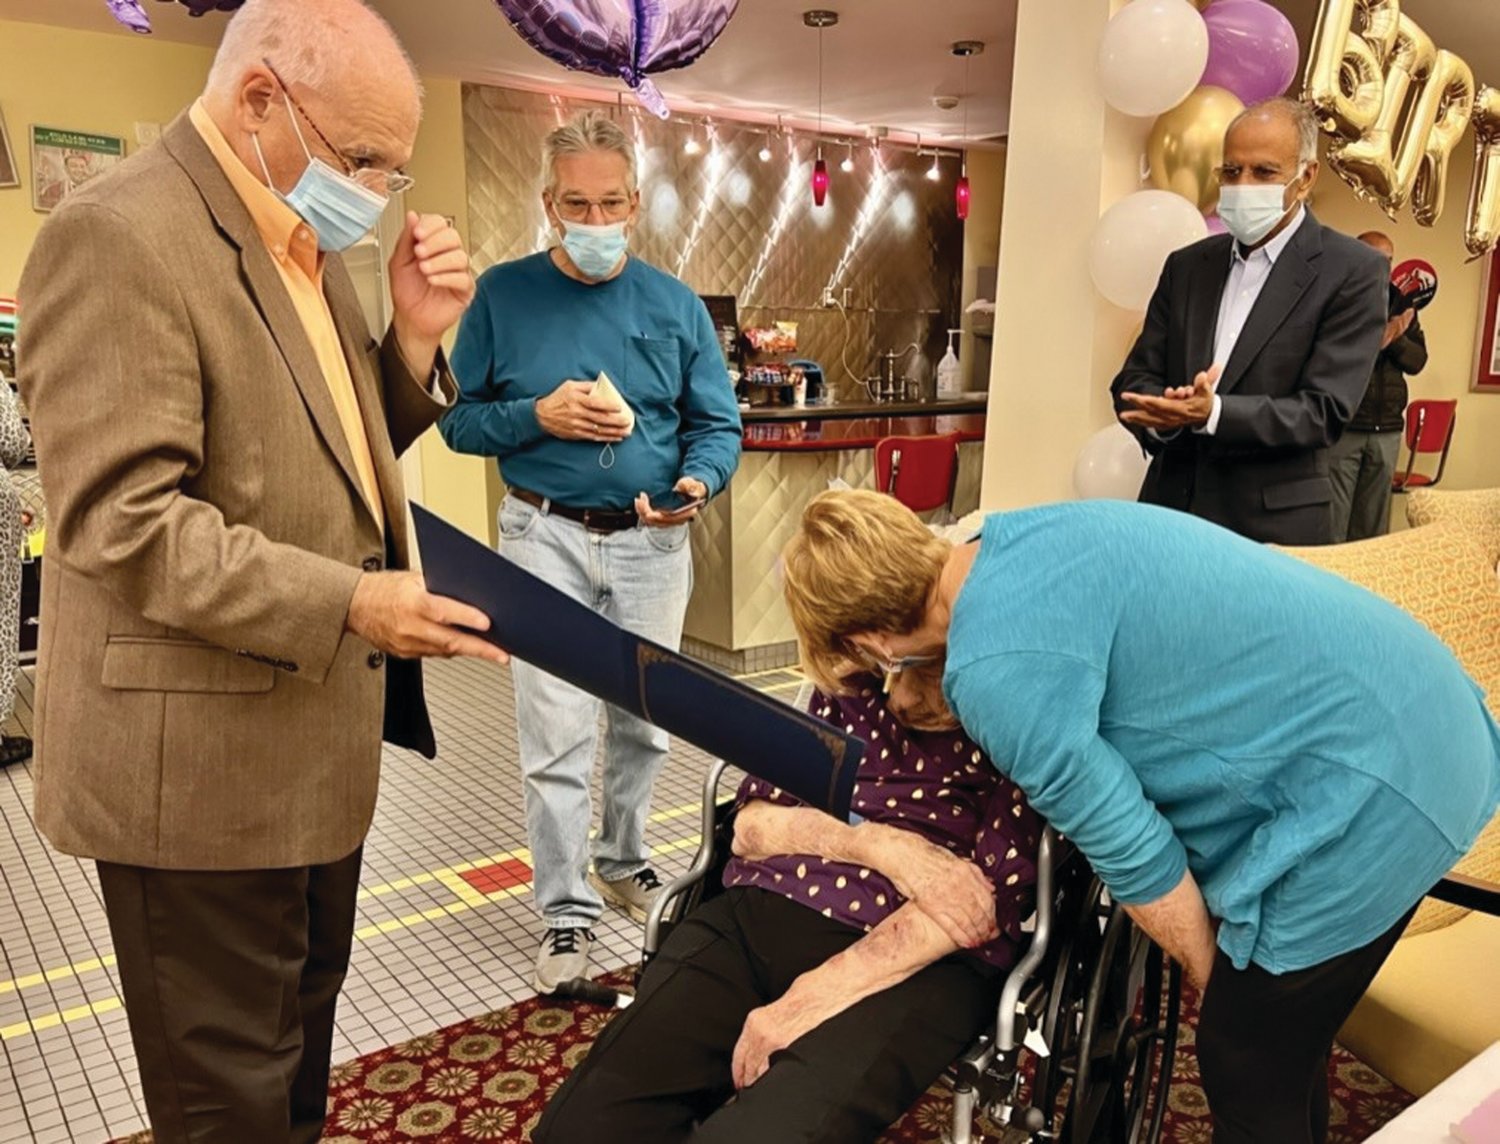 IT’S OFFICIAL: Johnston Mayor Joseph Polisena presented Joan Ruberg with a commemoration of her 100th birthday while her son-in-law Michael Nahod, Akshay Talwar and her daughter Carol Nahod look on.